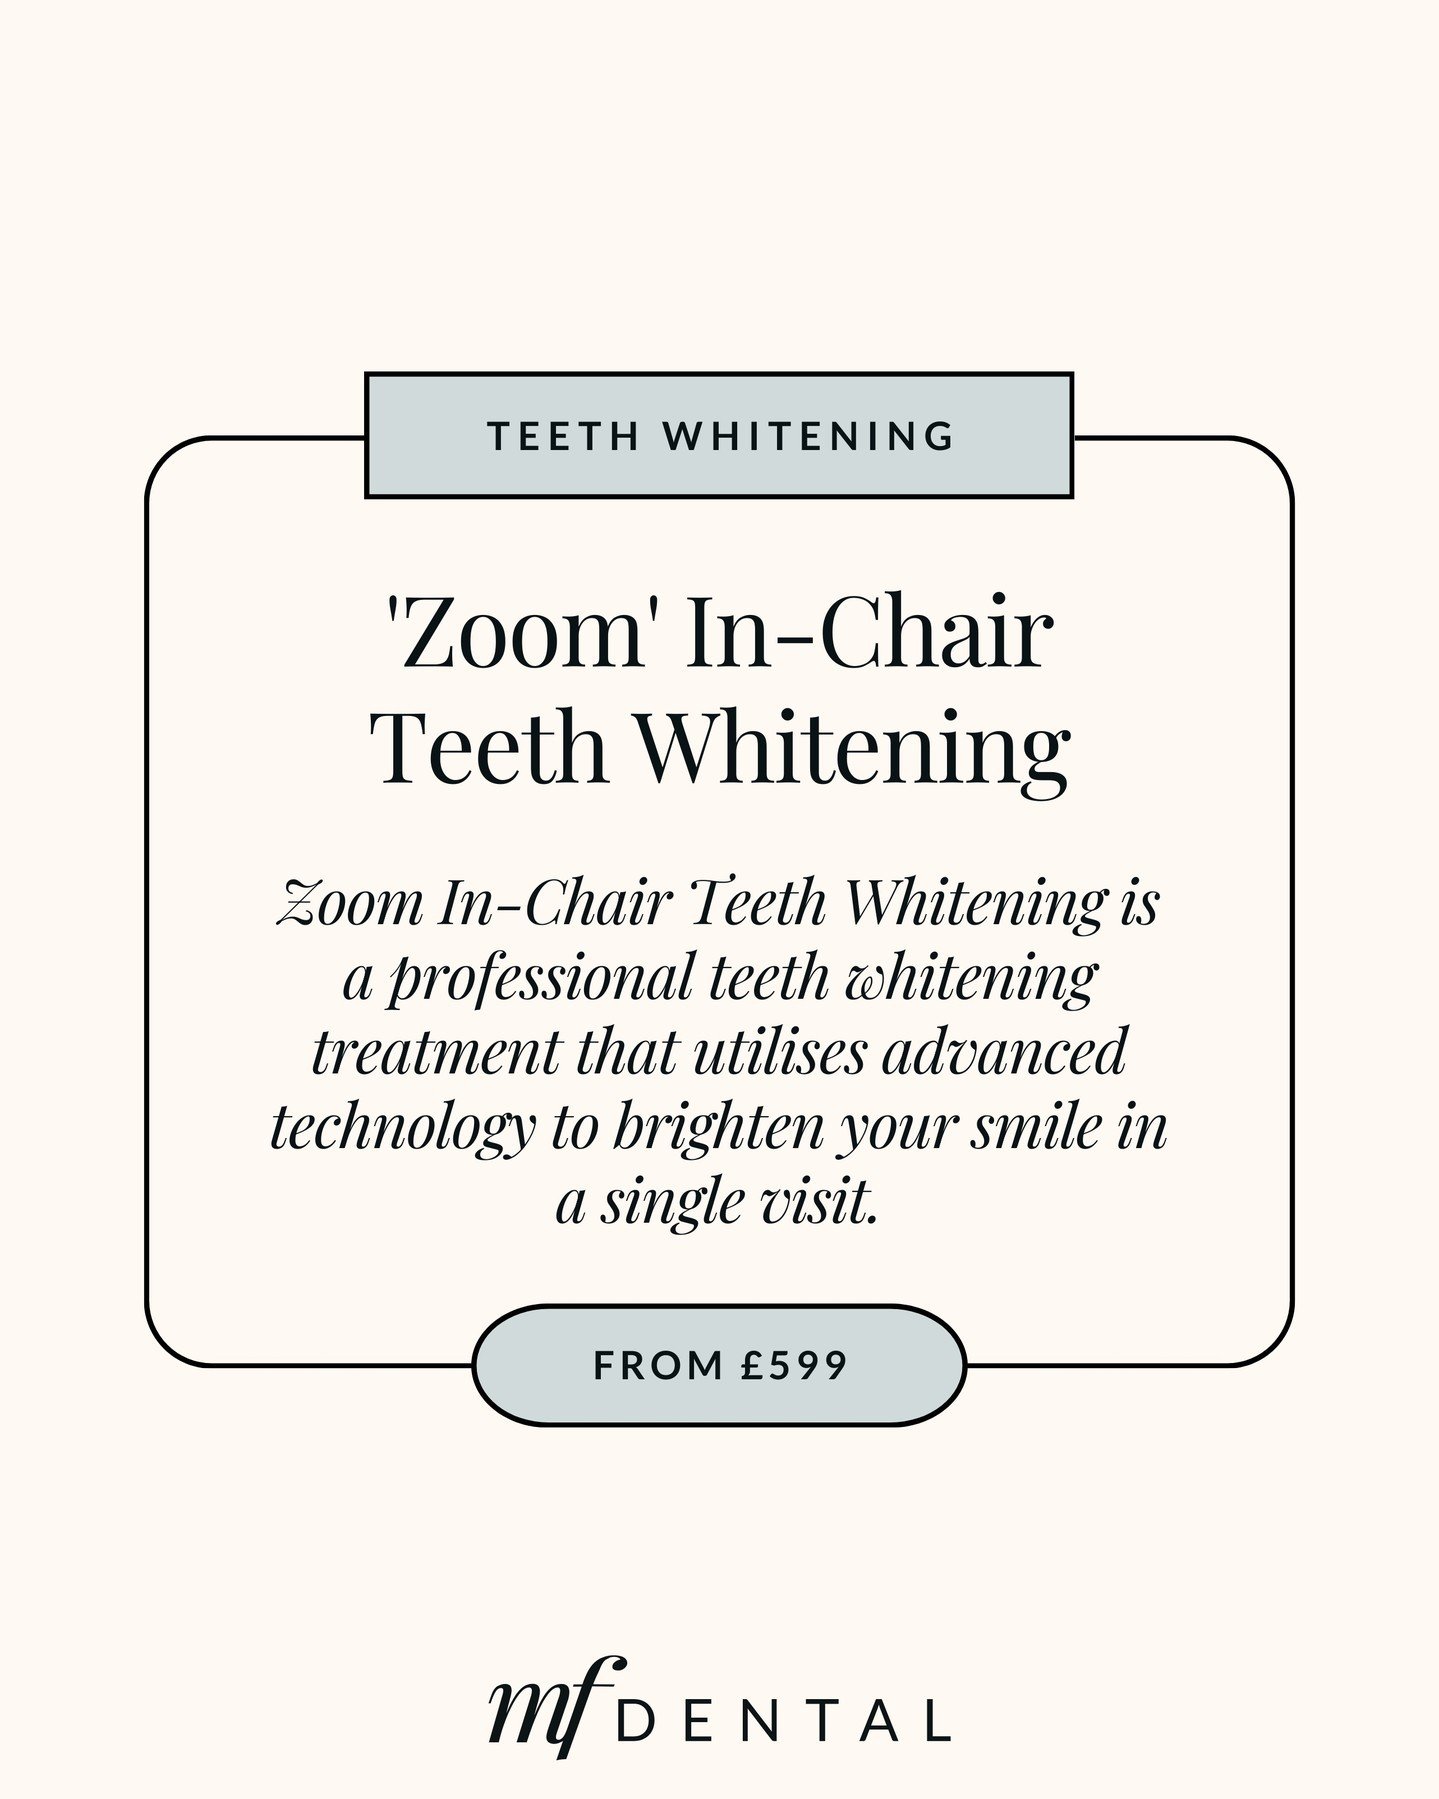 Zoom In-Chair Teeth Whitening is a professional teeth whitening treatment that utilises advanced technology to brighten your smile in a single visit. It is a safe and effective procedure performed by our experienced dental professionals.

For persona